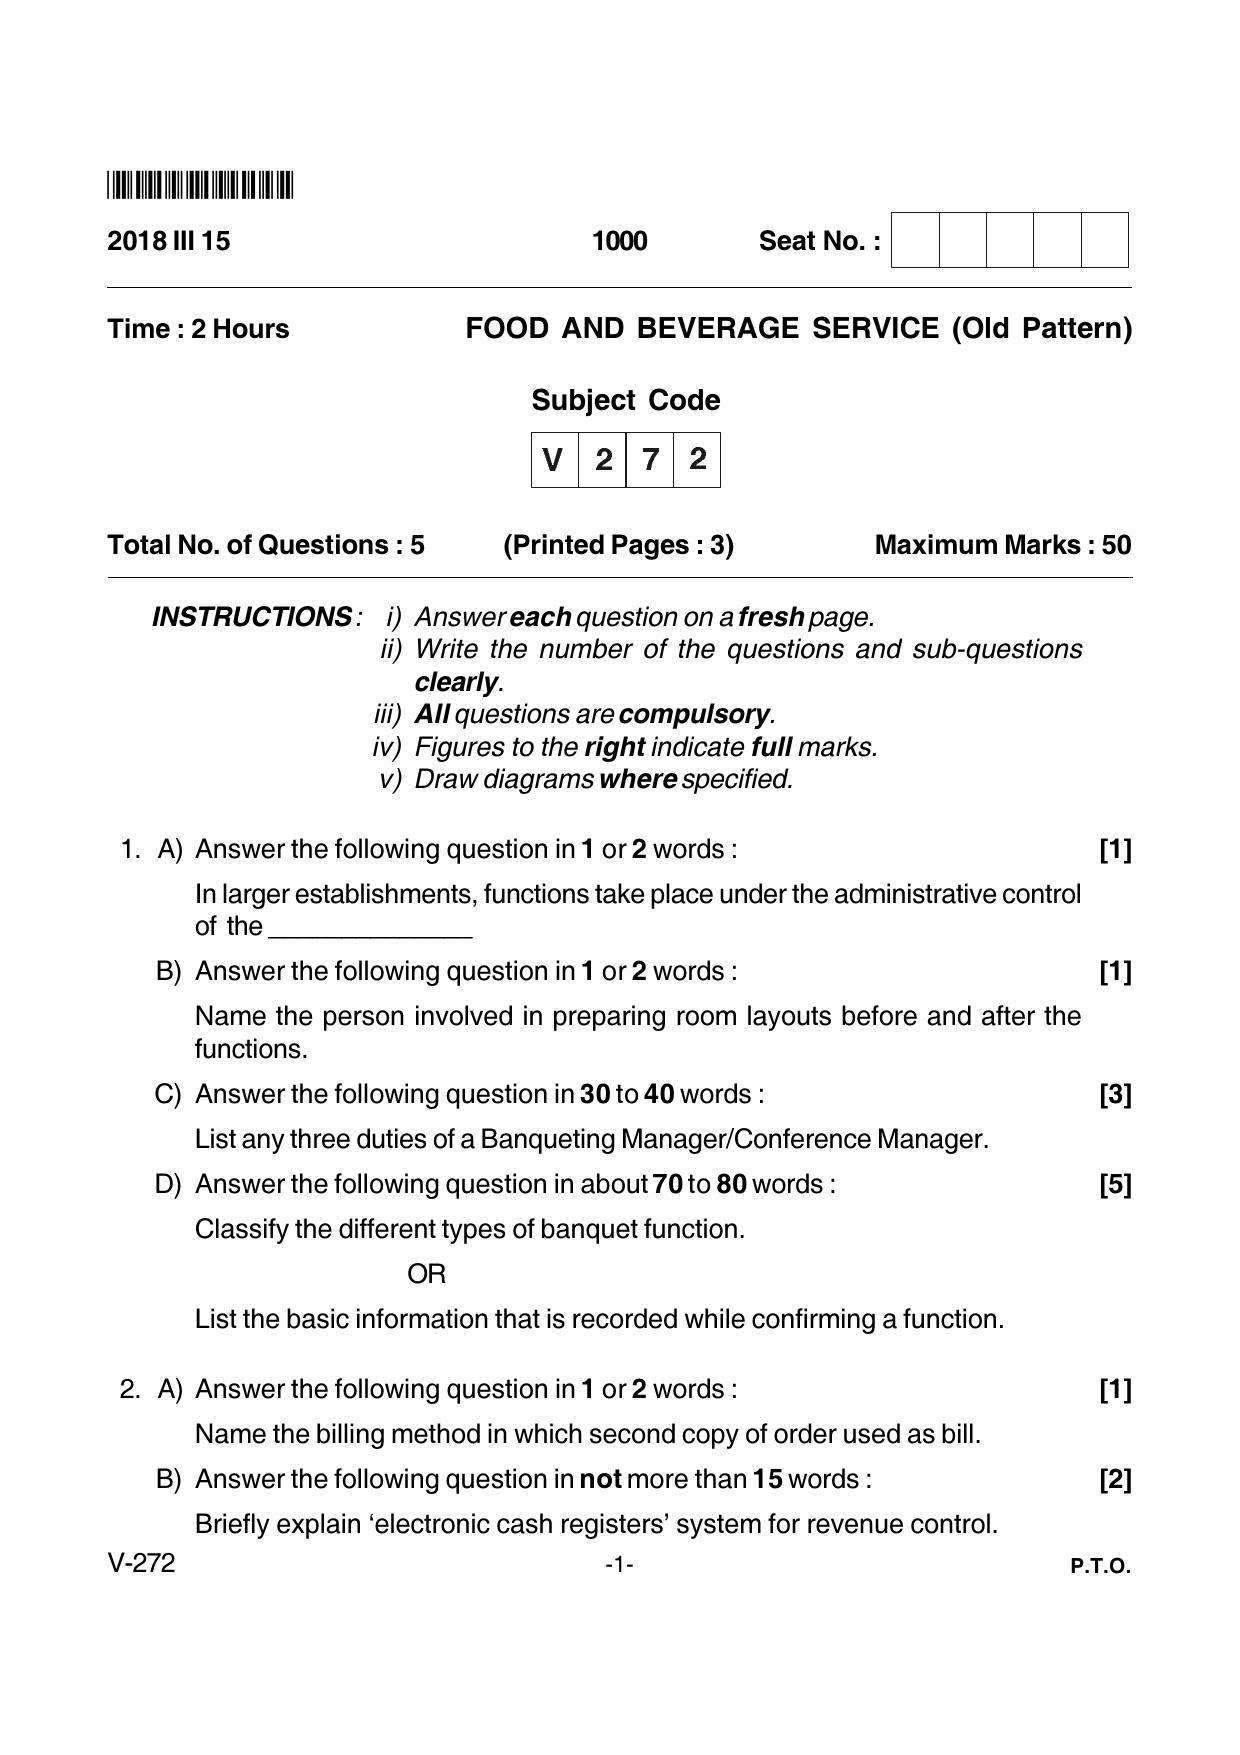 Goa Board Class 12 Food & Beverage Service  Voc 272 Old Pattern (March 2018) Question Paper - Page 1